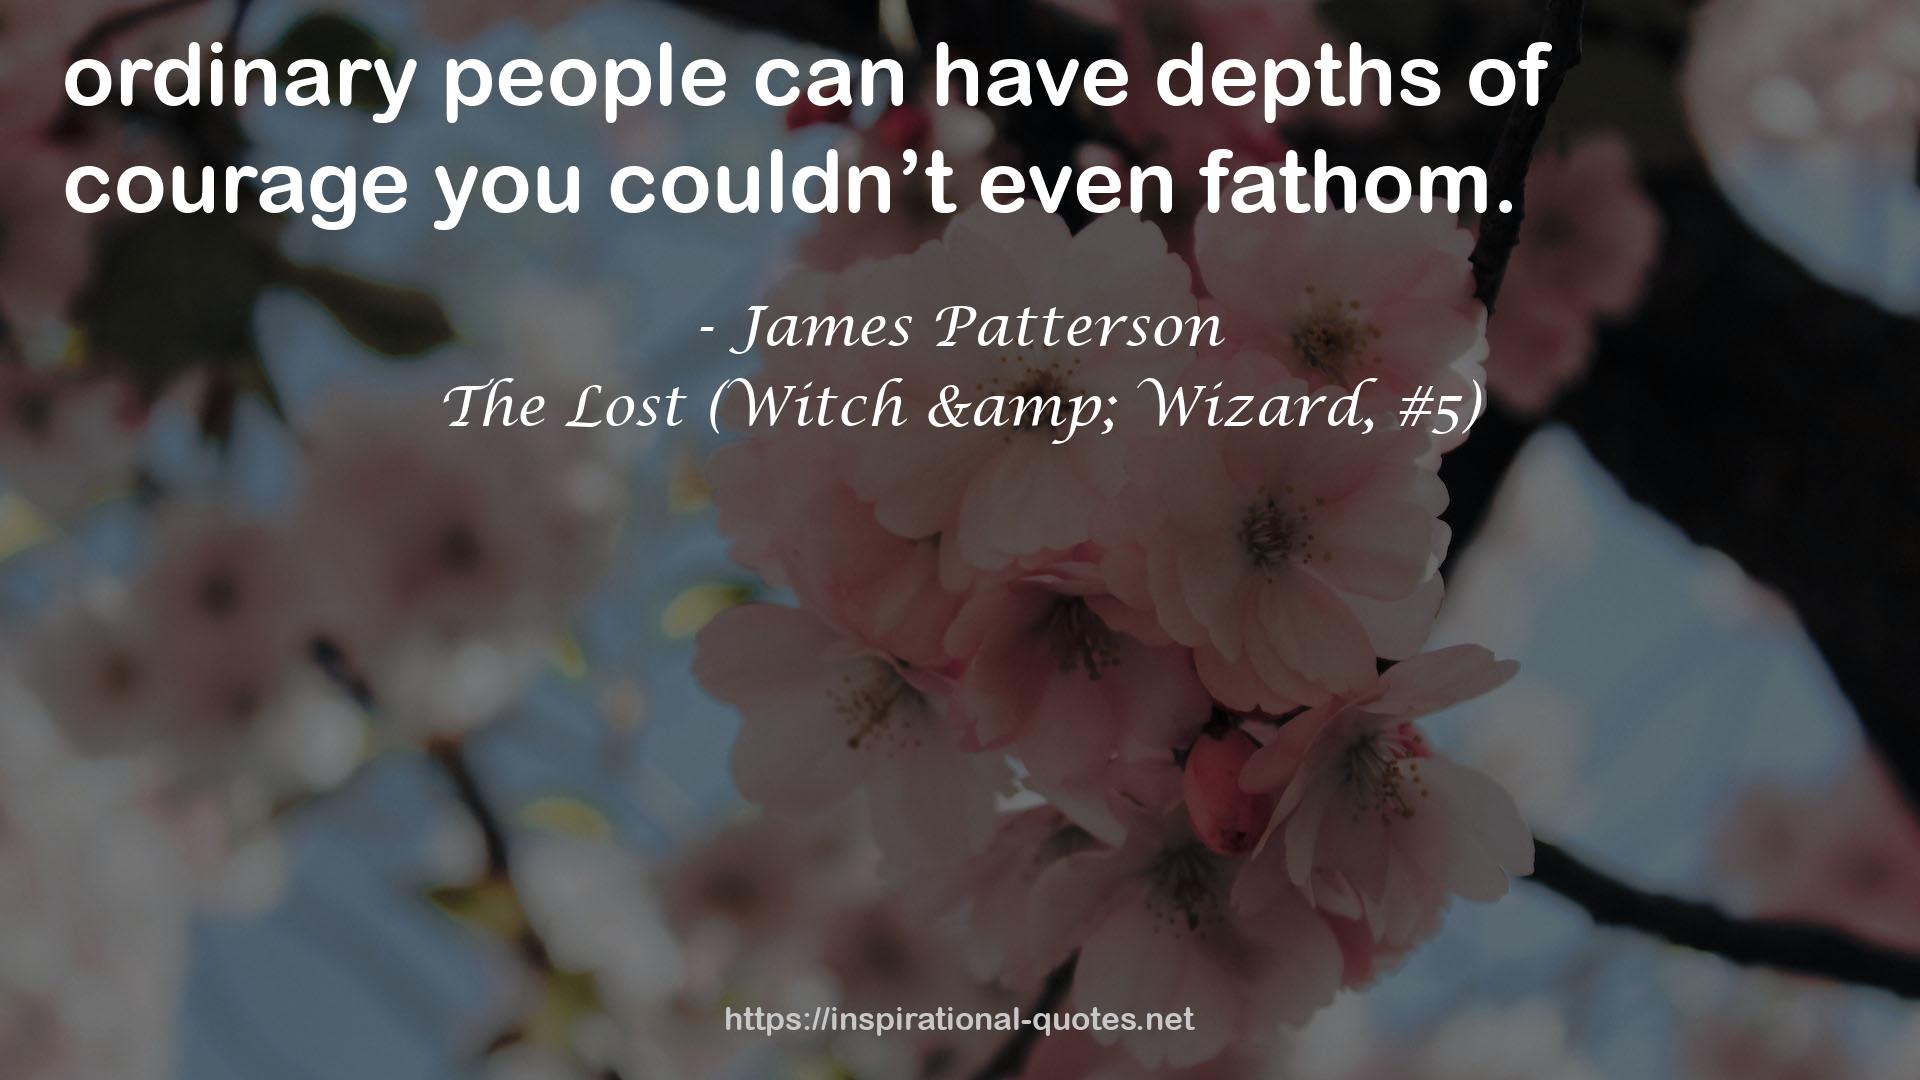 The Lost (Witch & Wizard, #5) QUOTES